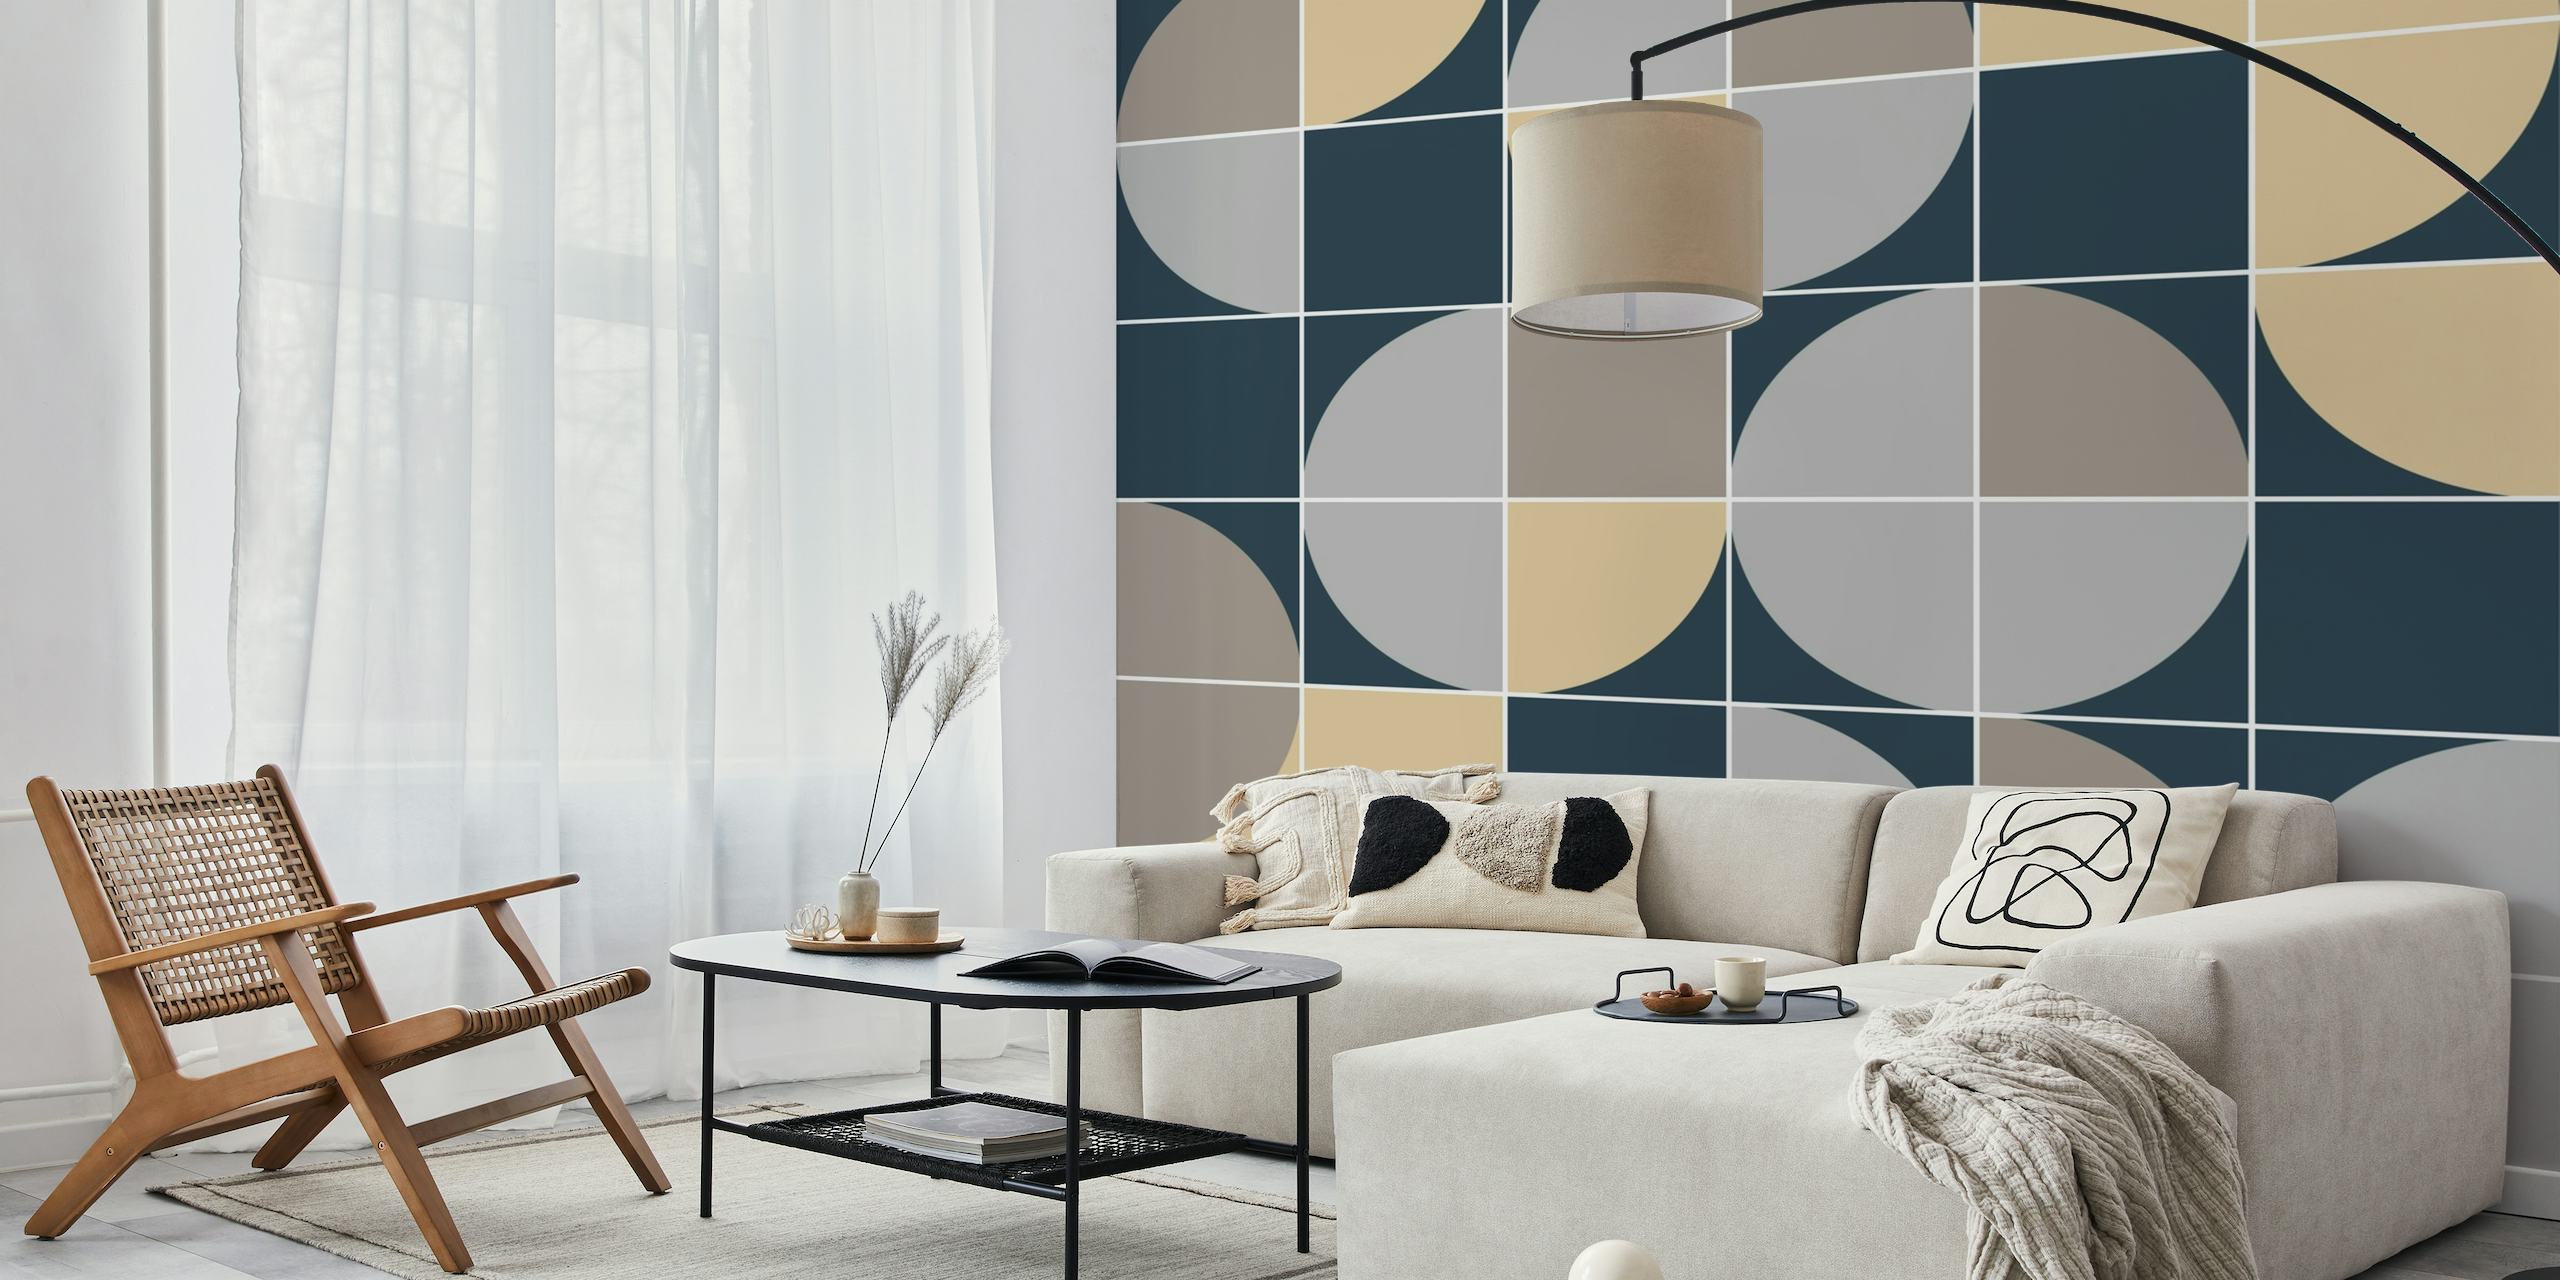 Retro mod abstract circle wall mural with geometric pattern in beige, navy, and gray tones